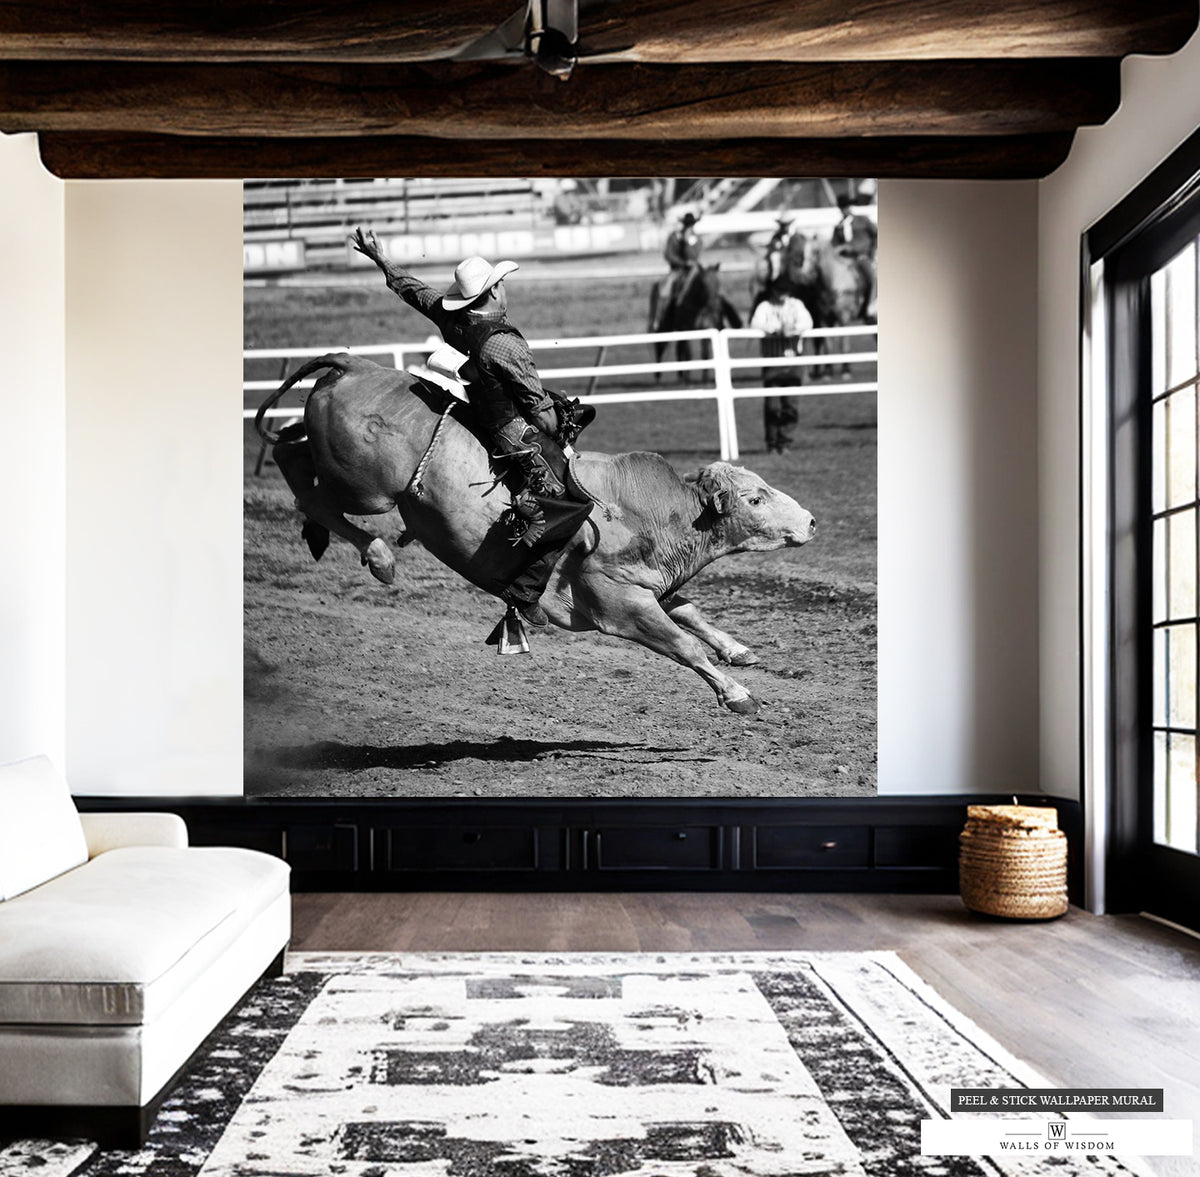 Intense rodeo action captured in black and white wallpaper mural.